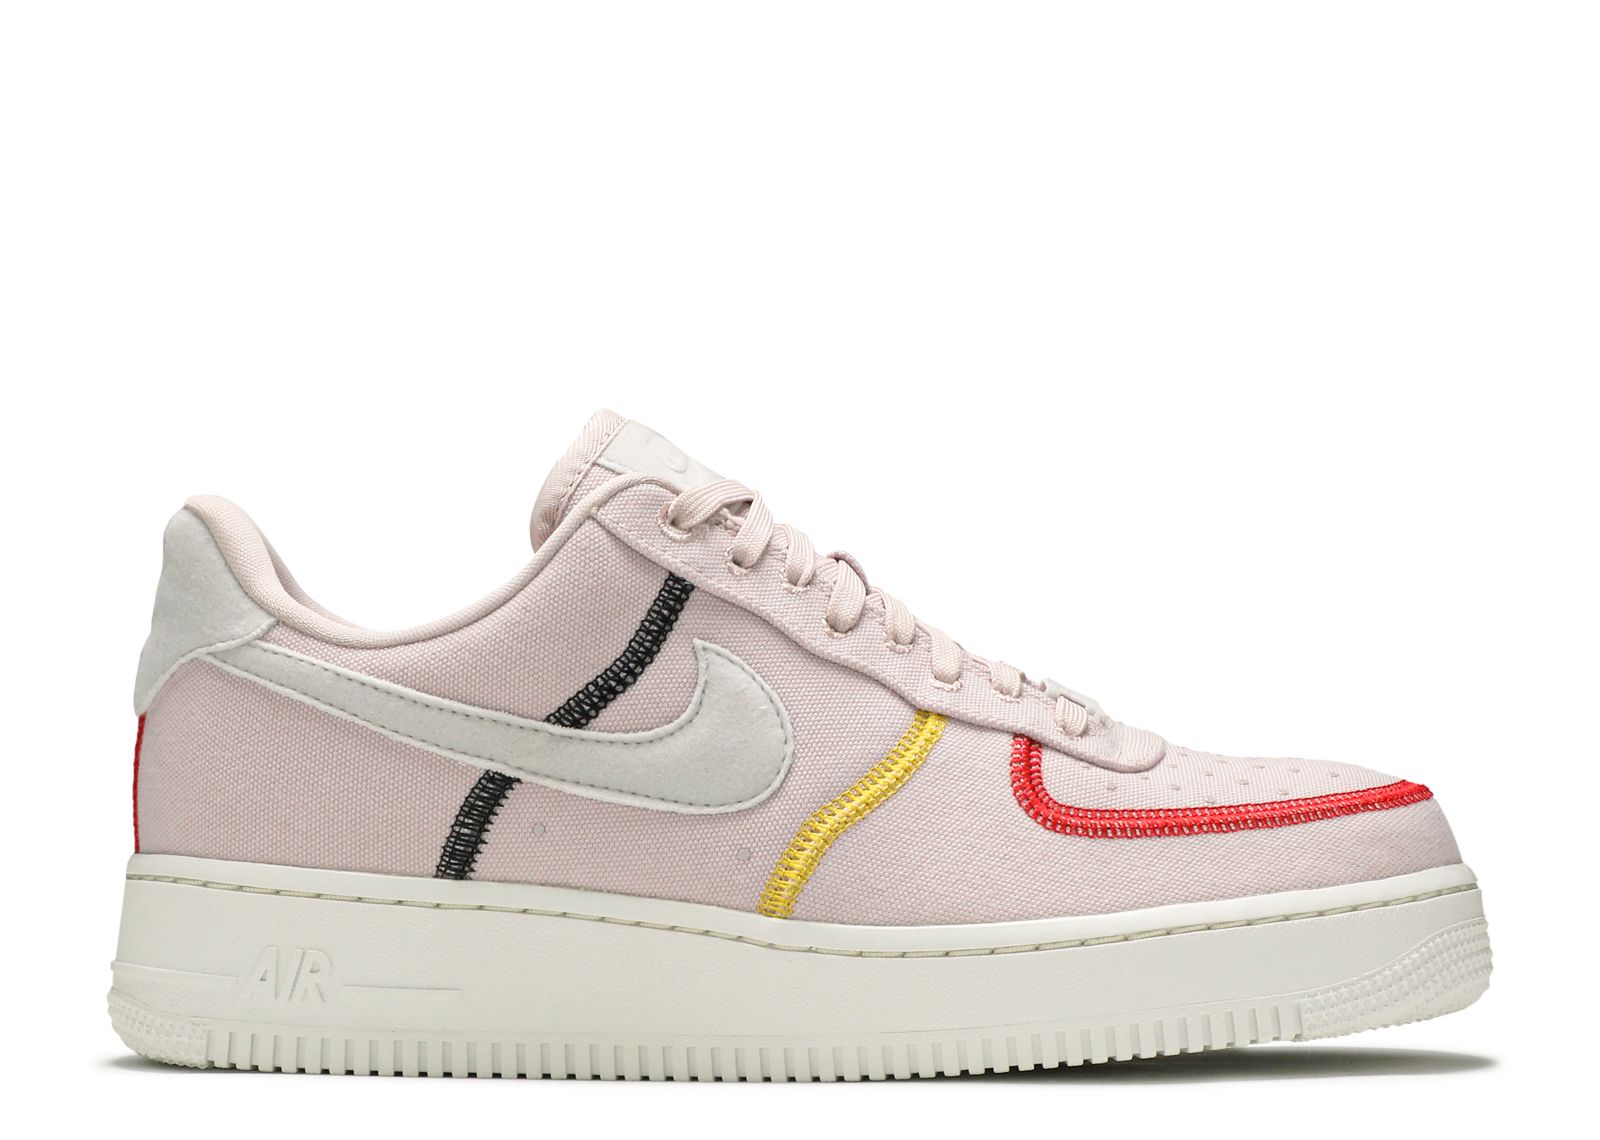 Кроссовки Nike Wmns Air Force 1 '07 Low Lx 'Stitched Canvas - Siltstone Red', красный